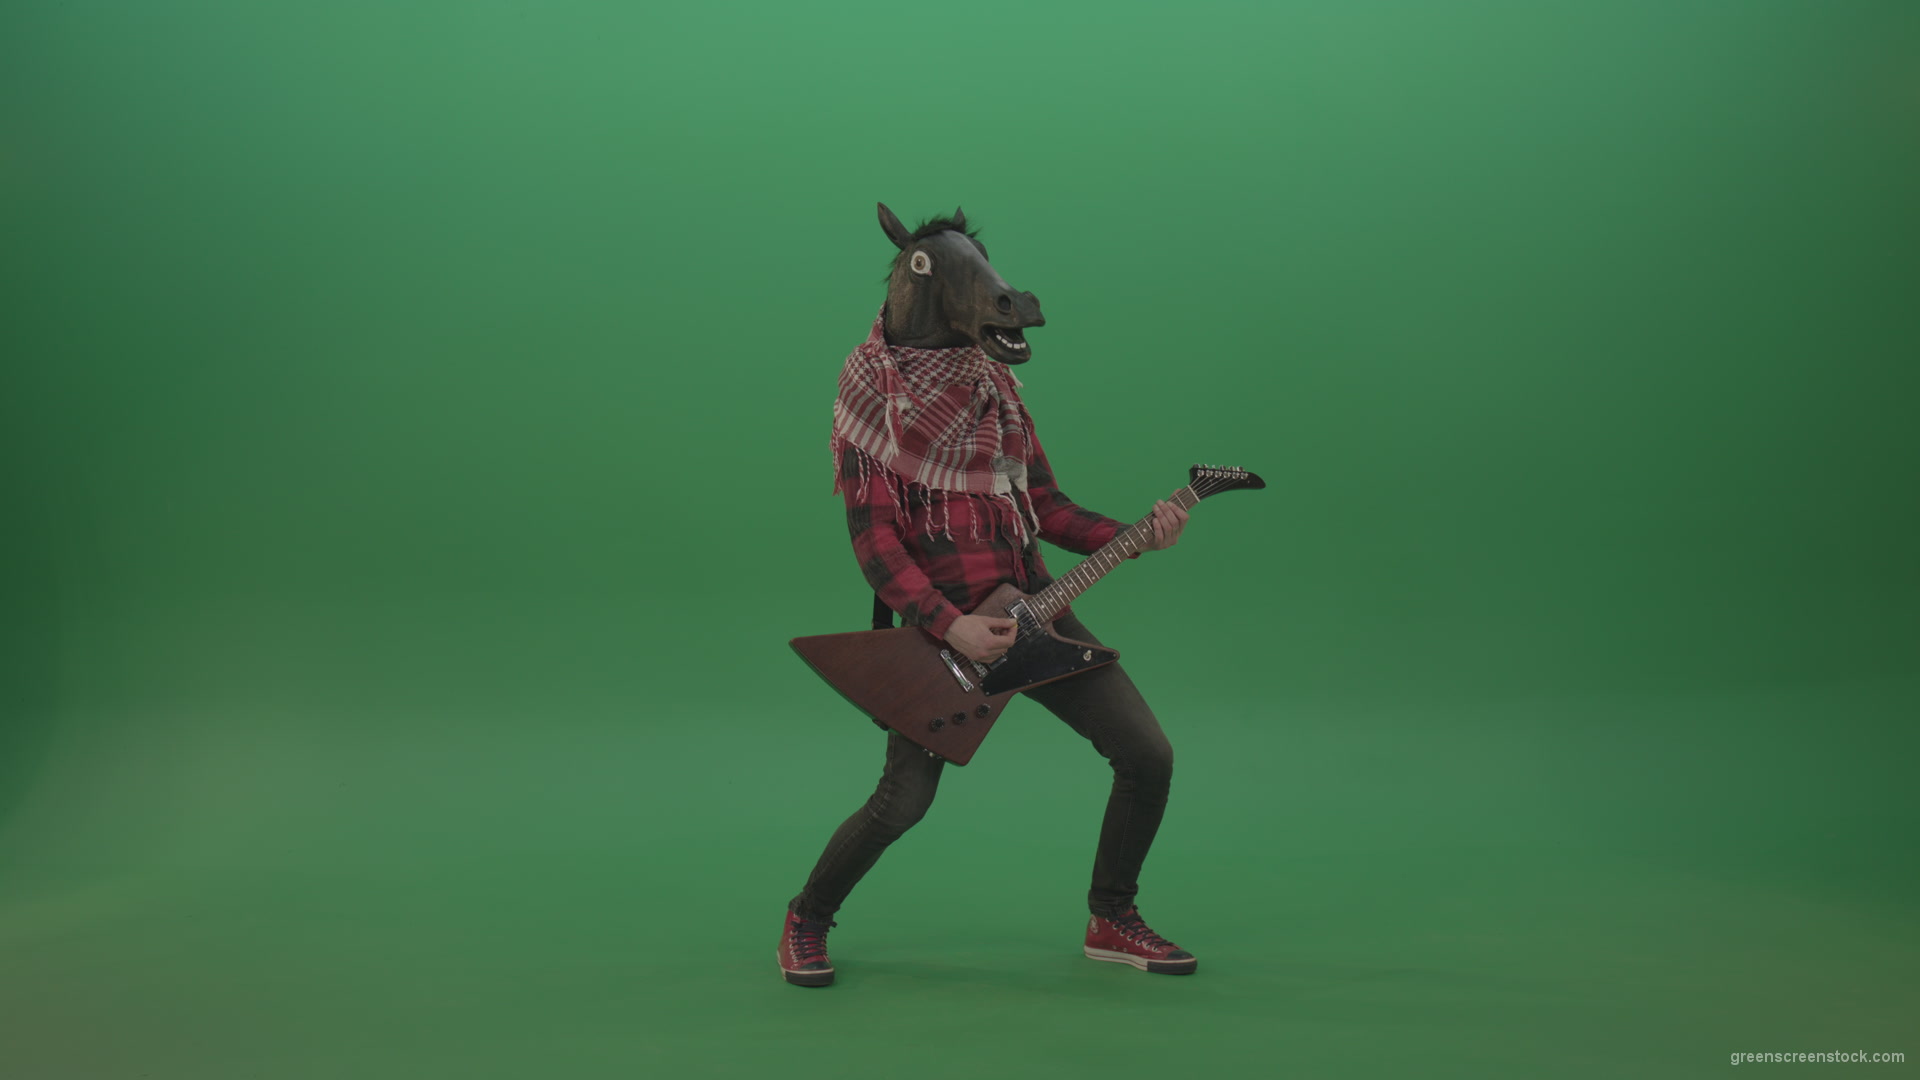 Green-screen-horse-man-guitaris-play-hard-rock-music-with-guitar-isolated-on-green-background_001 Green Screen Stock